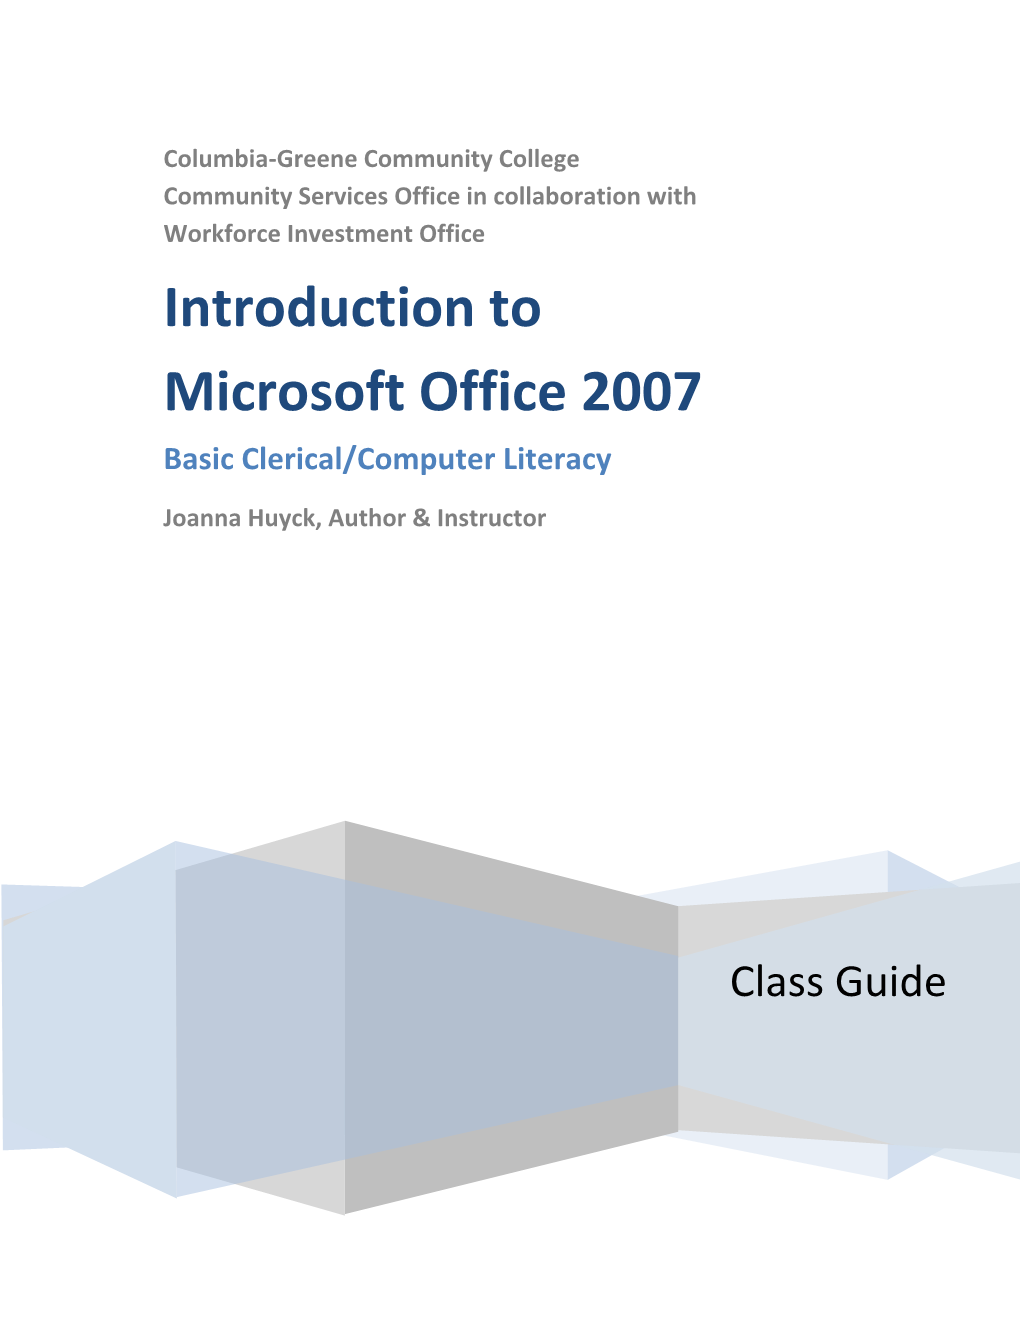 Introduction to Microsoft Office 2007 Basic Clerical/Computer Literacy